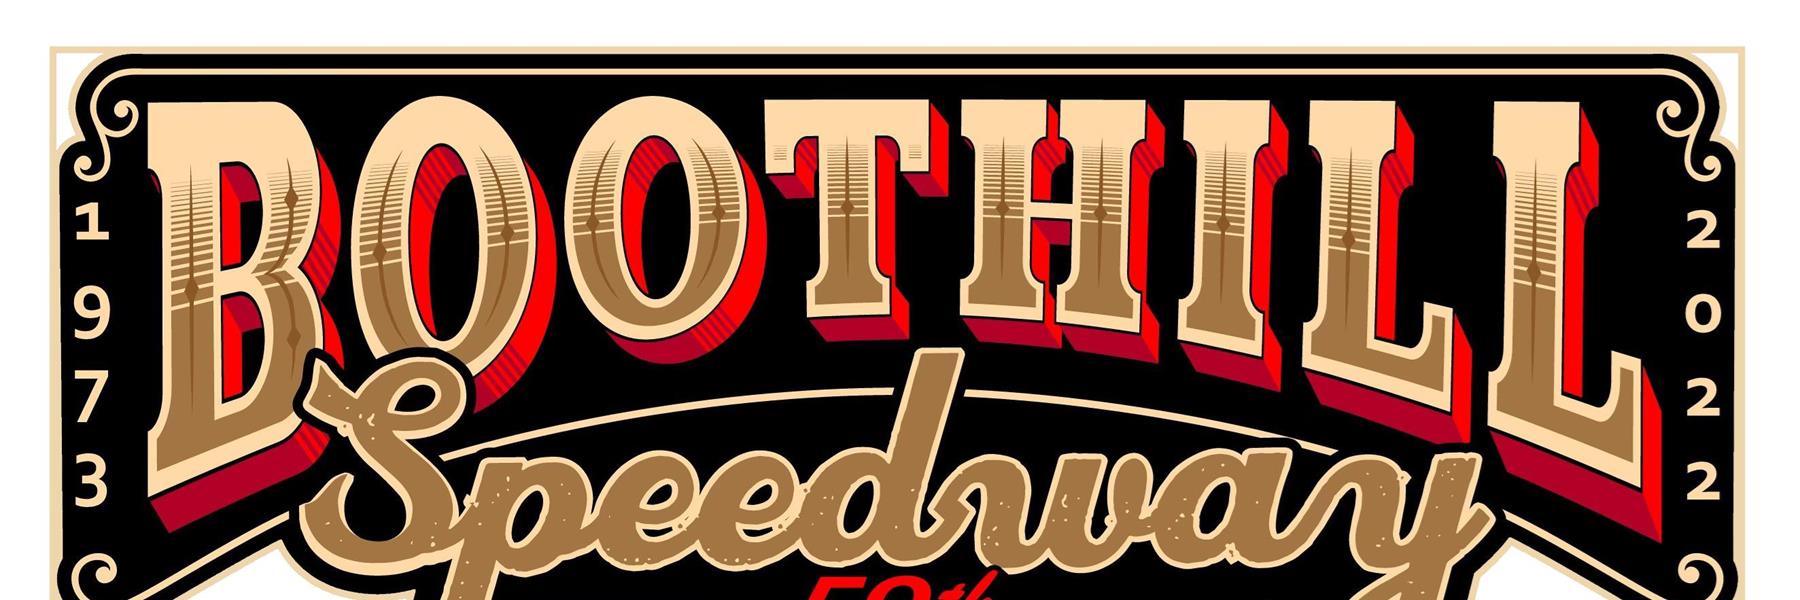 5/27/2023 - Boothill Speedway